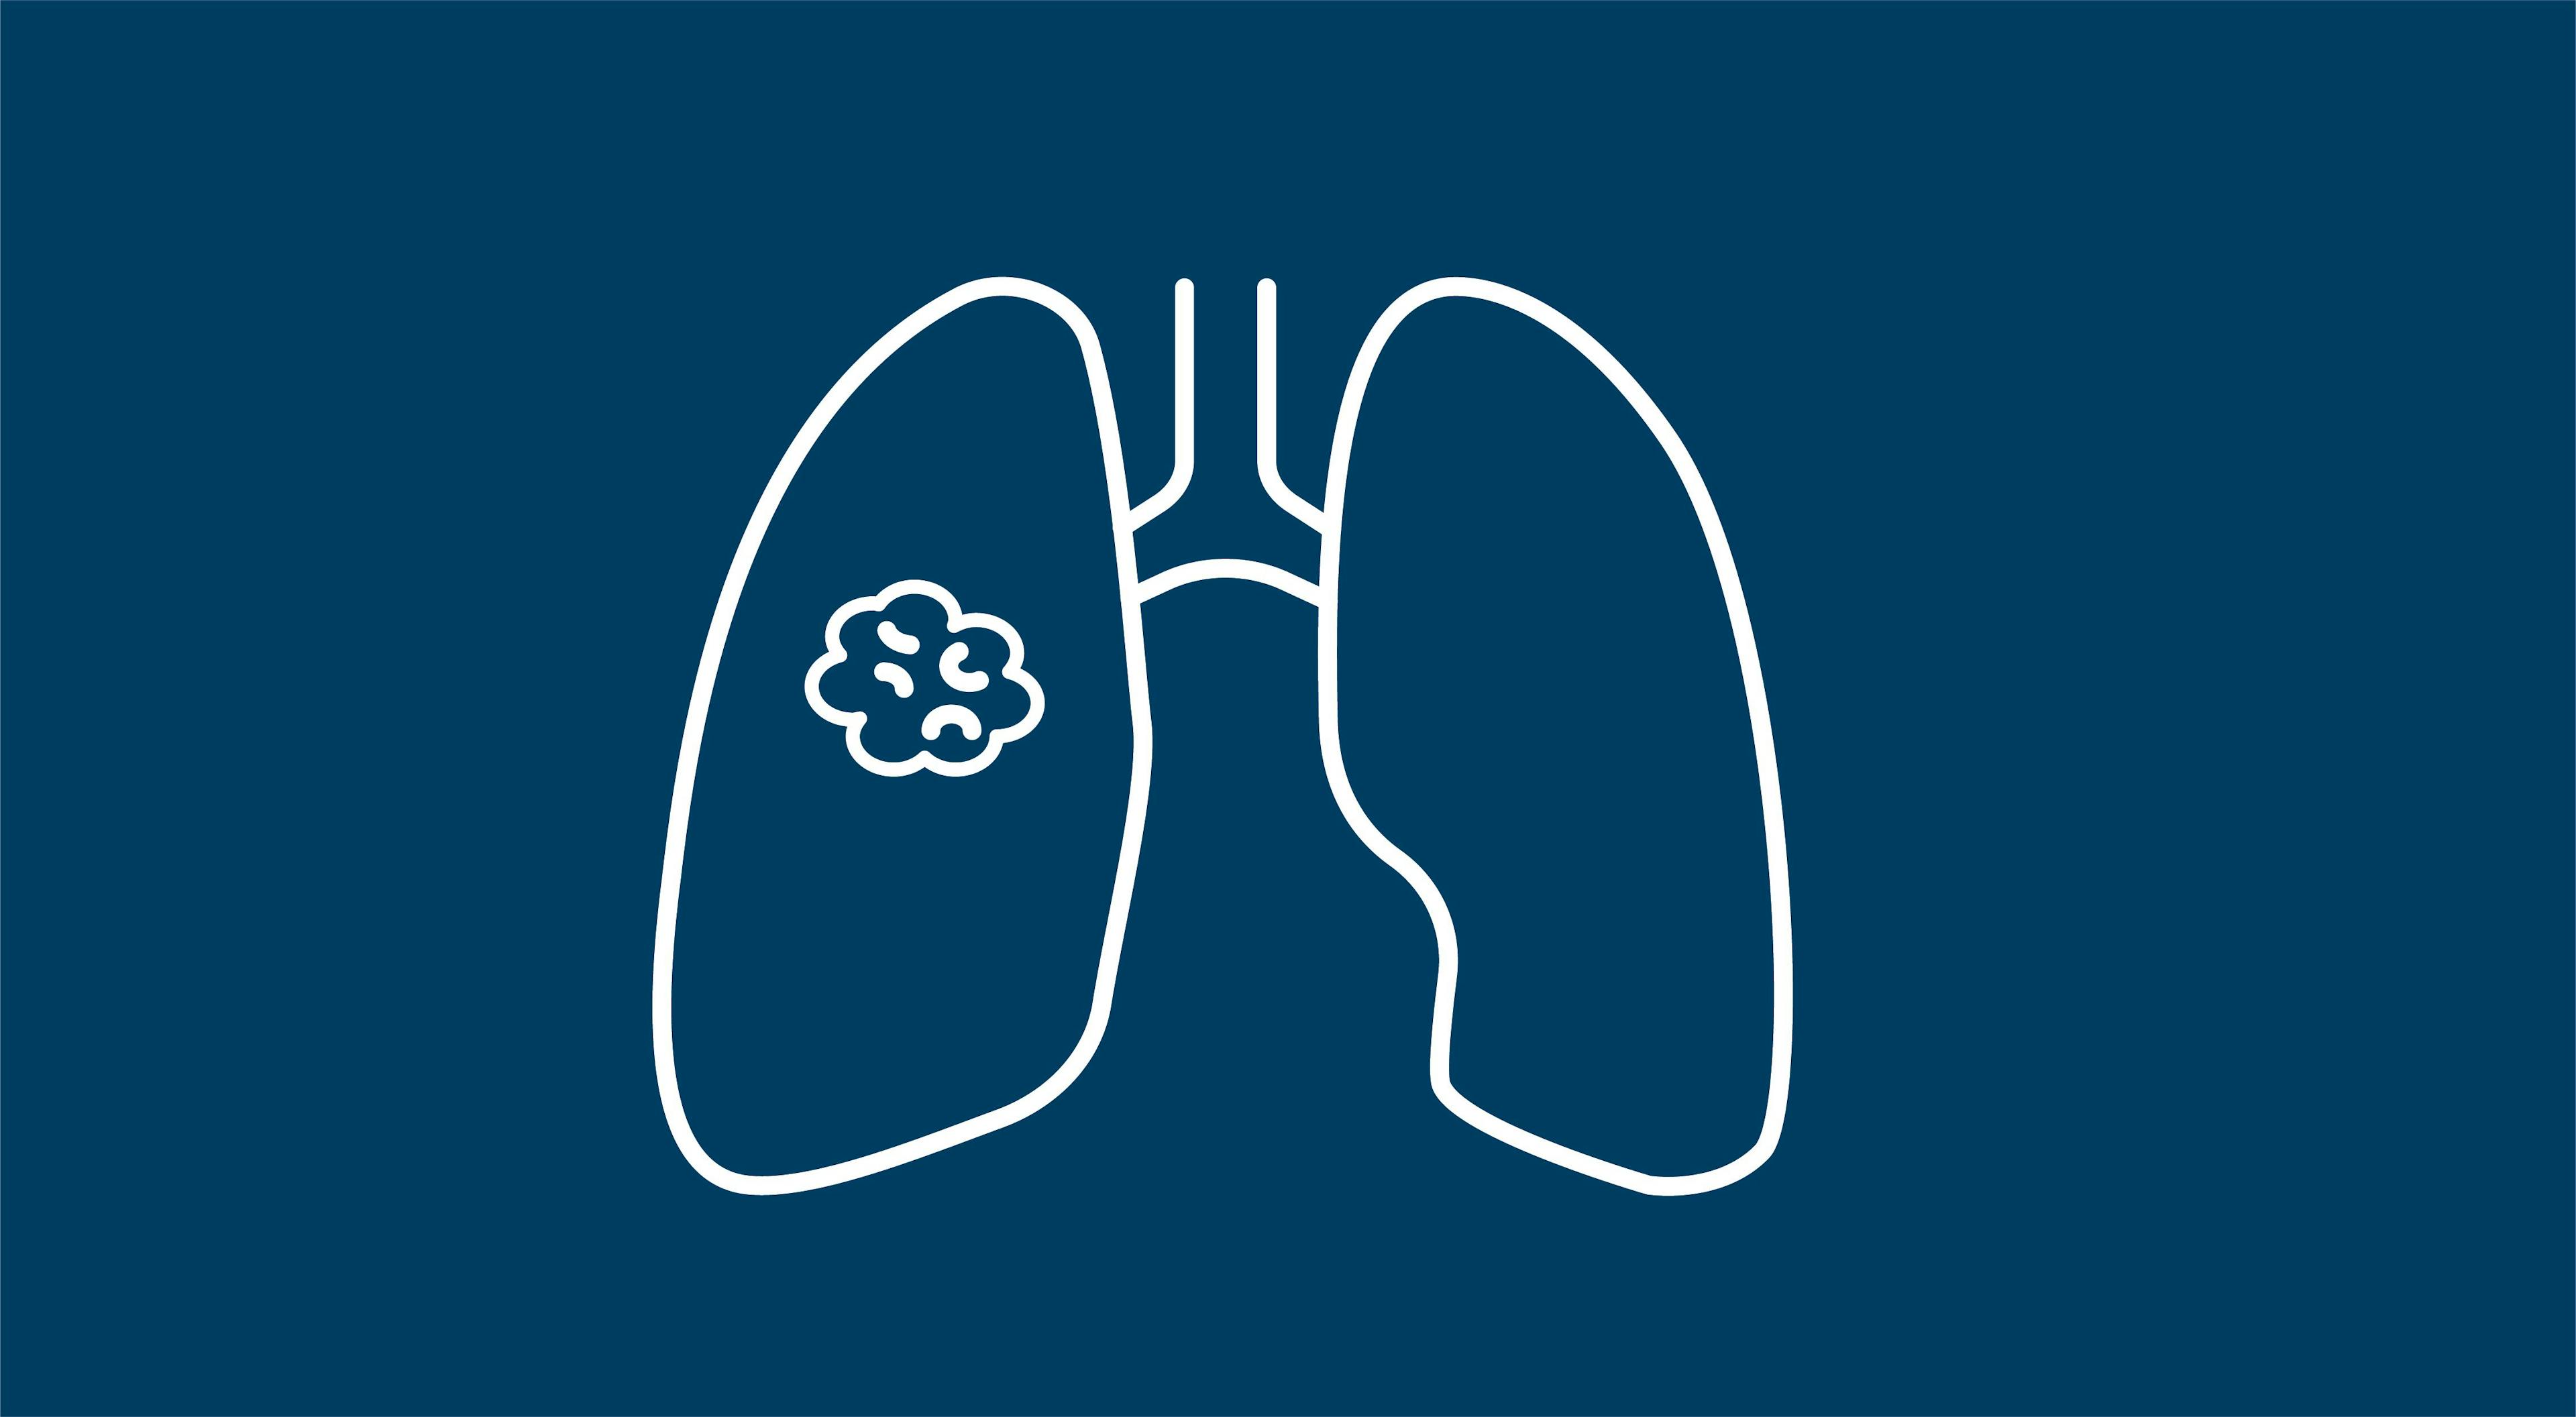 Zipalertinib Elicits Early Clinical Activity in EGFR Exon 20+ NSCLC